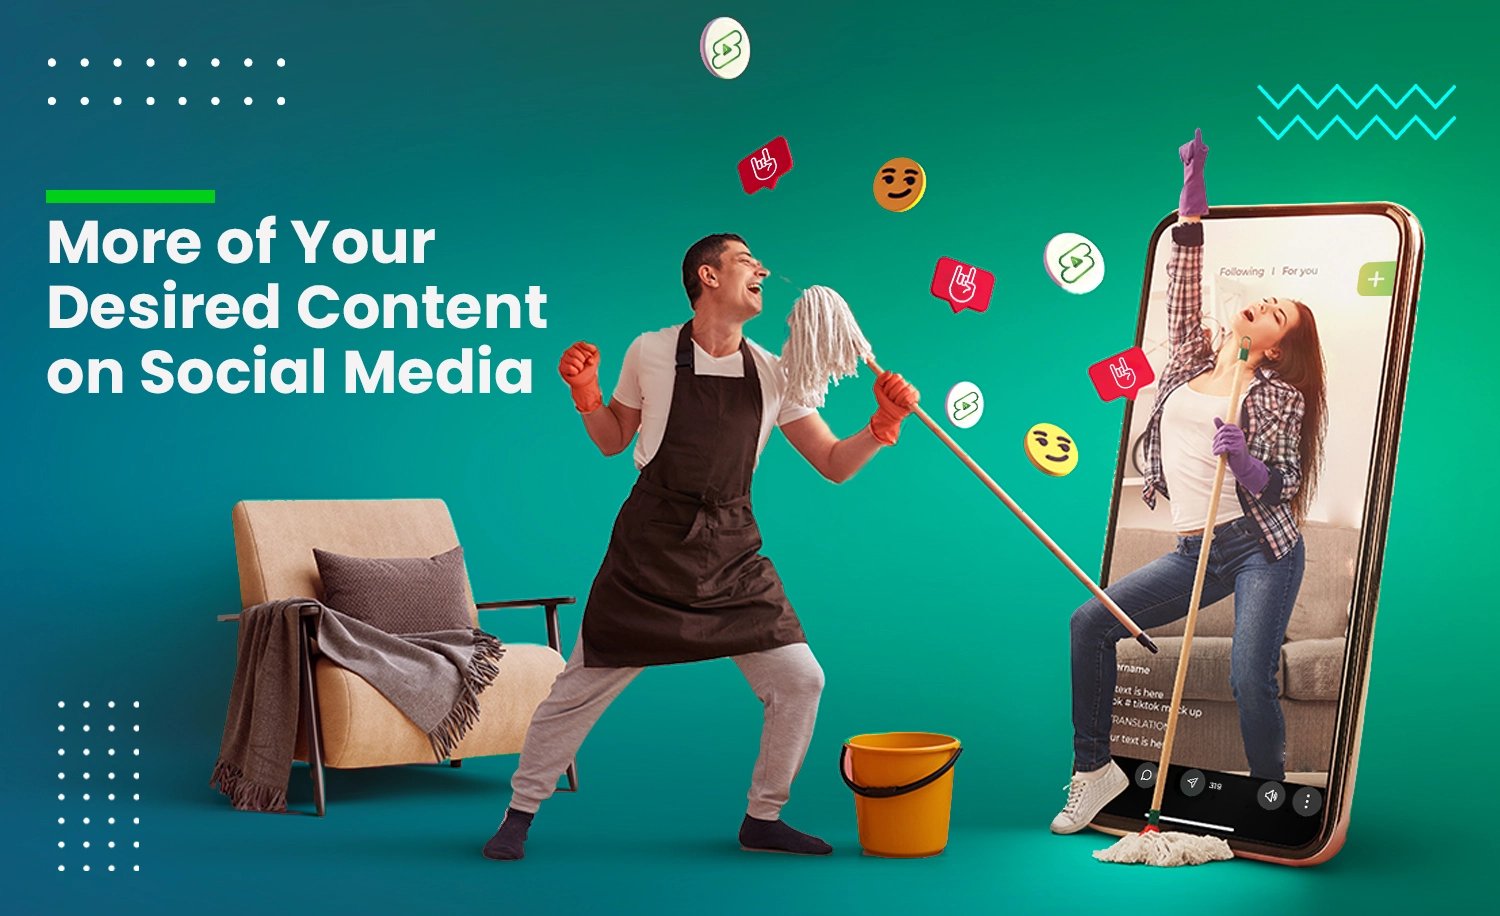 How to Obtain More of Your Desired Content on Social Media